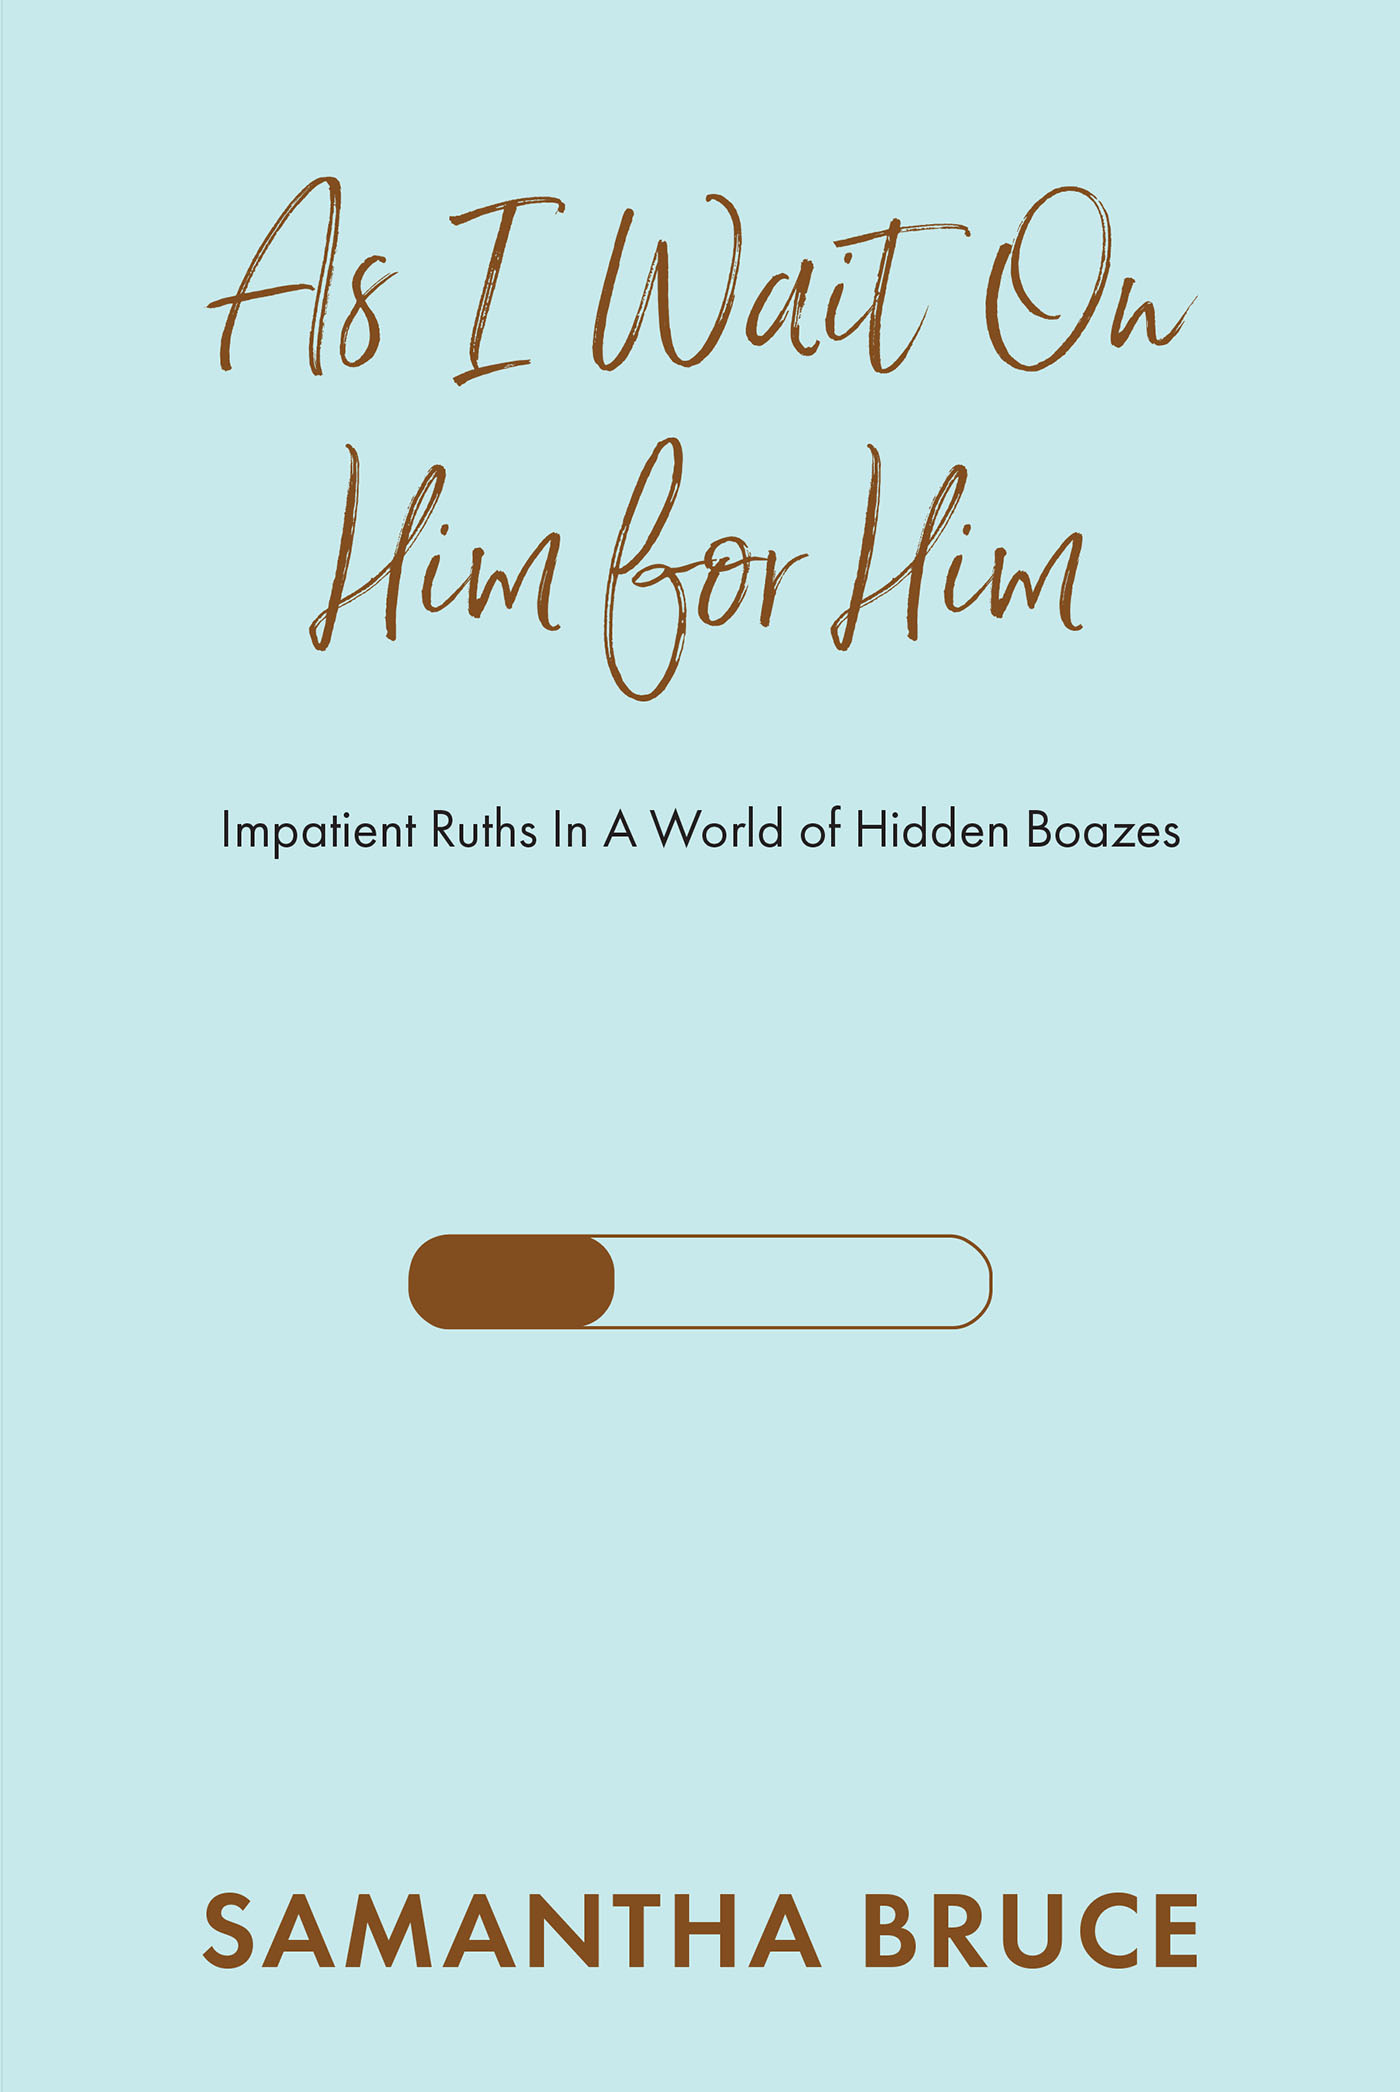 Samantha Bruce’s Newly Released “As I Wait on Him for Him: Impatient Ruths In A World of Hidden Boazes” is a Message of Encouragement for Those Seeking True Partnership